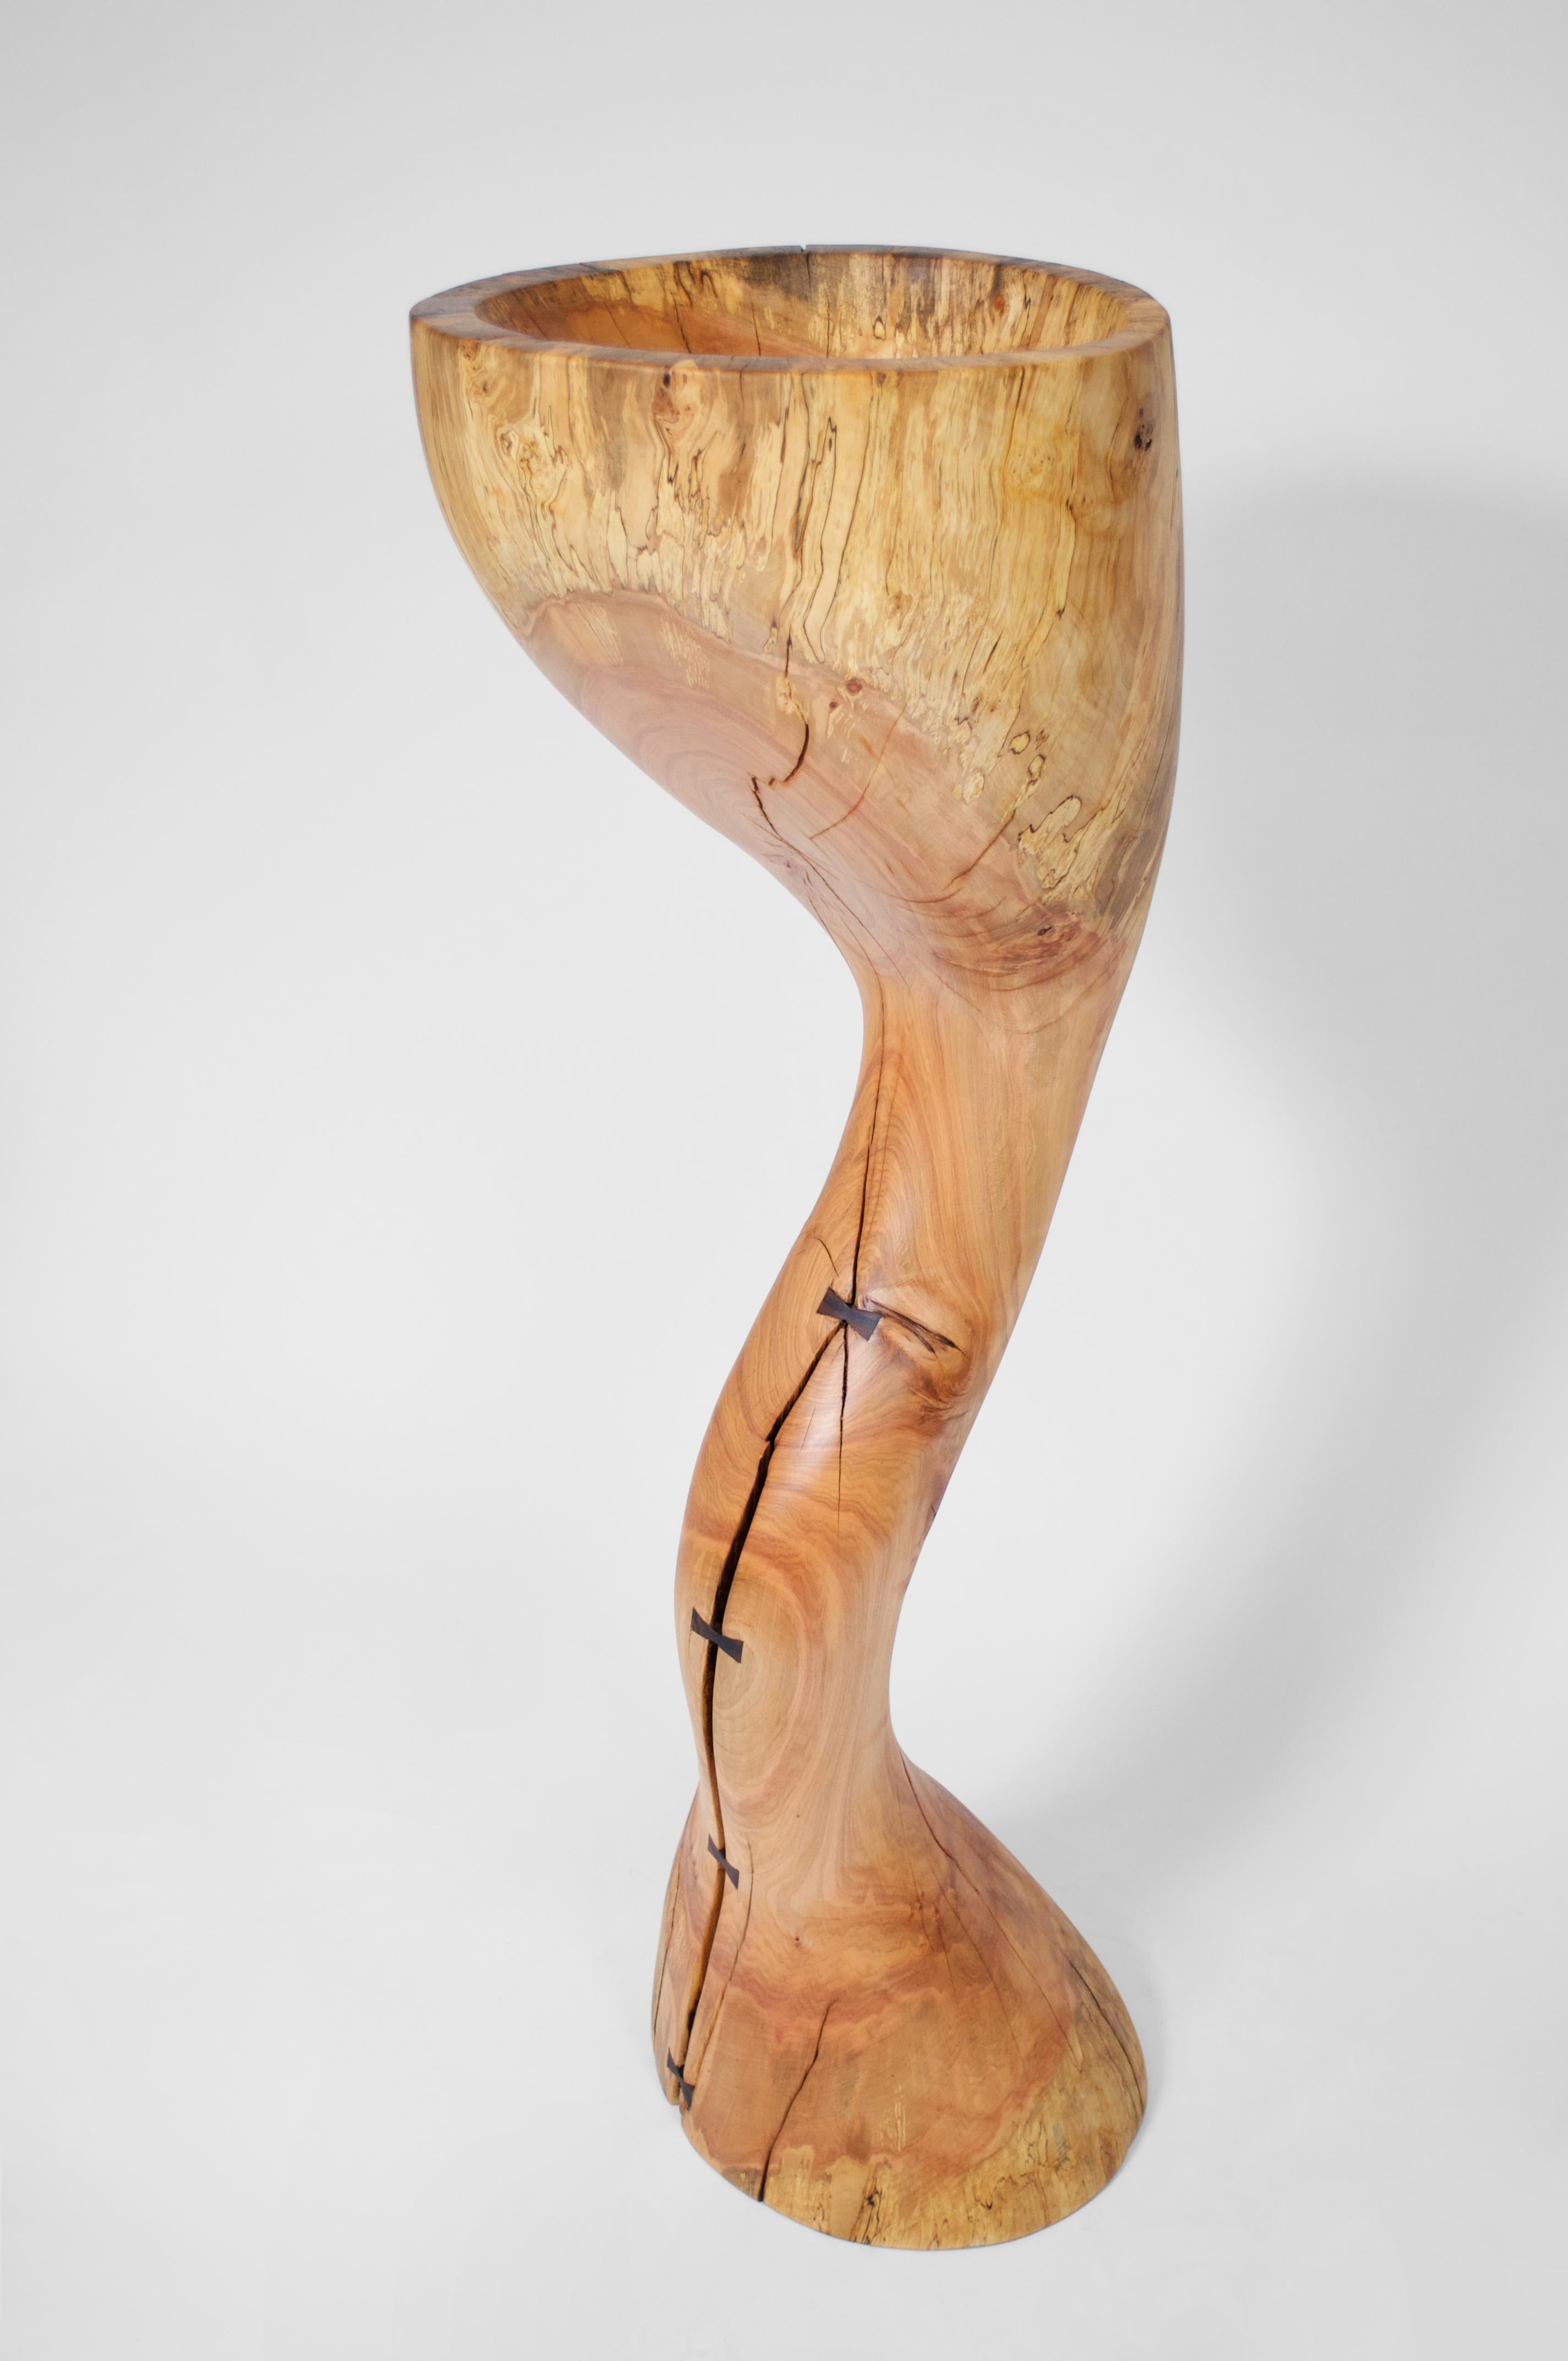 Norway maple vessel 1305 by Jörg Pietschmann
Dimensions: D 46 x W 47 x H 143 cm 
Materials: Norway Maple. 
Finish: Polished oil finish.


Made from a strongly curved main branch of an old maple tree.
In Pietschmann’s sculptures, trees that